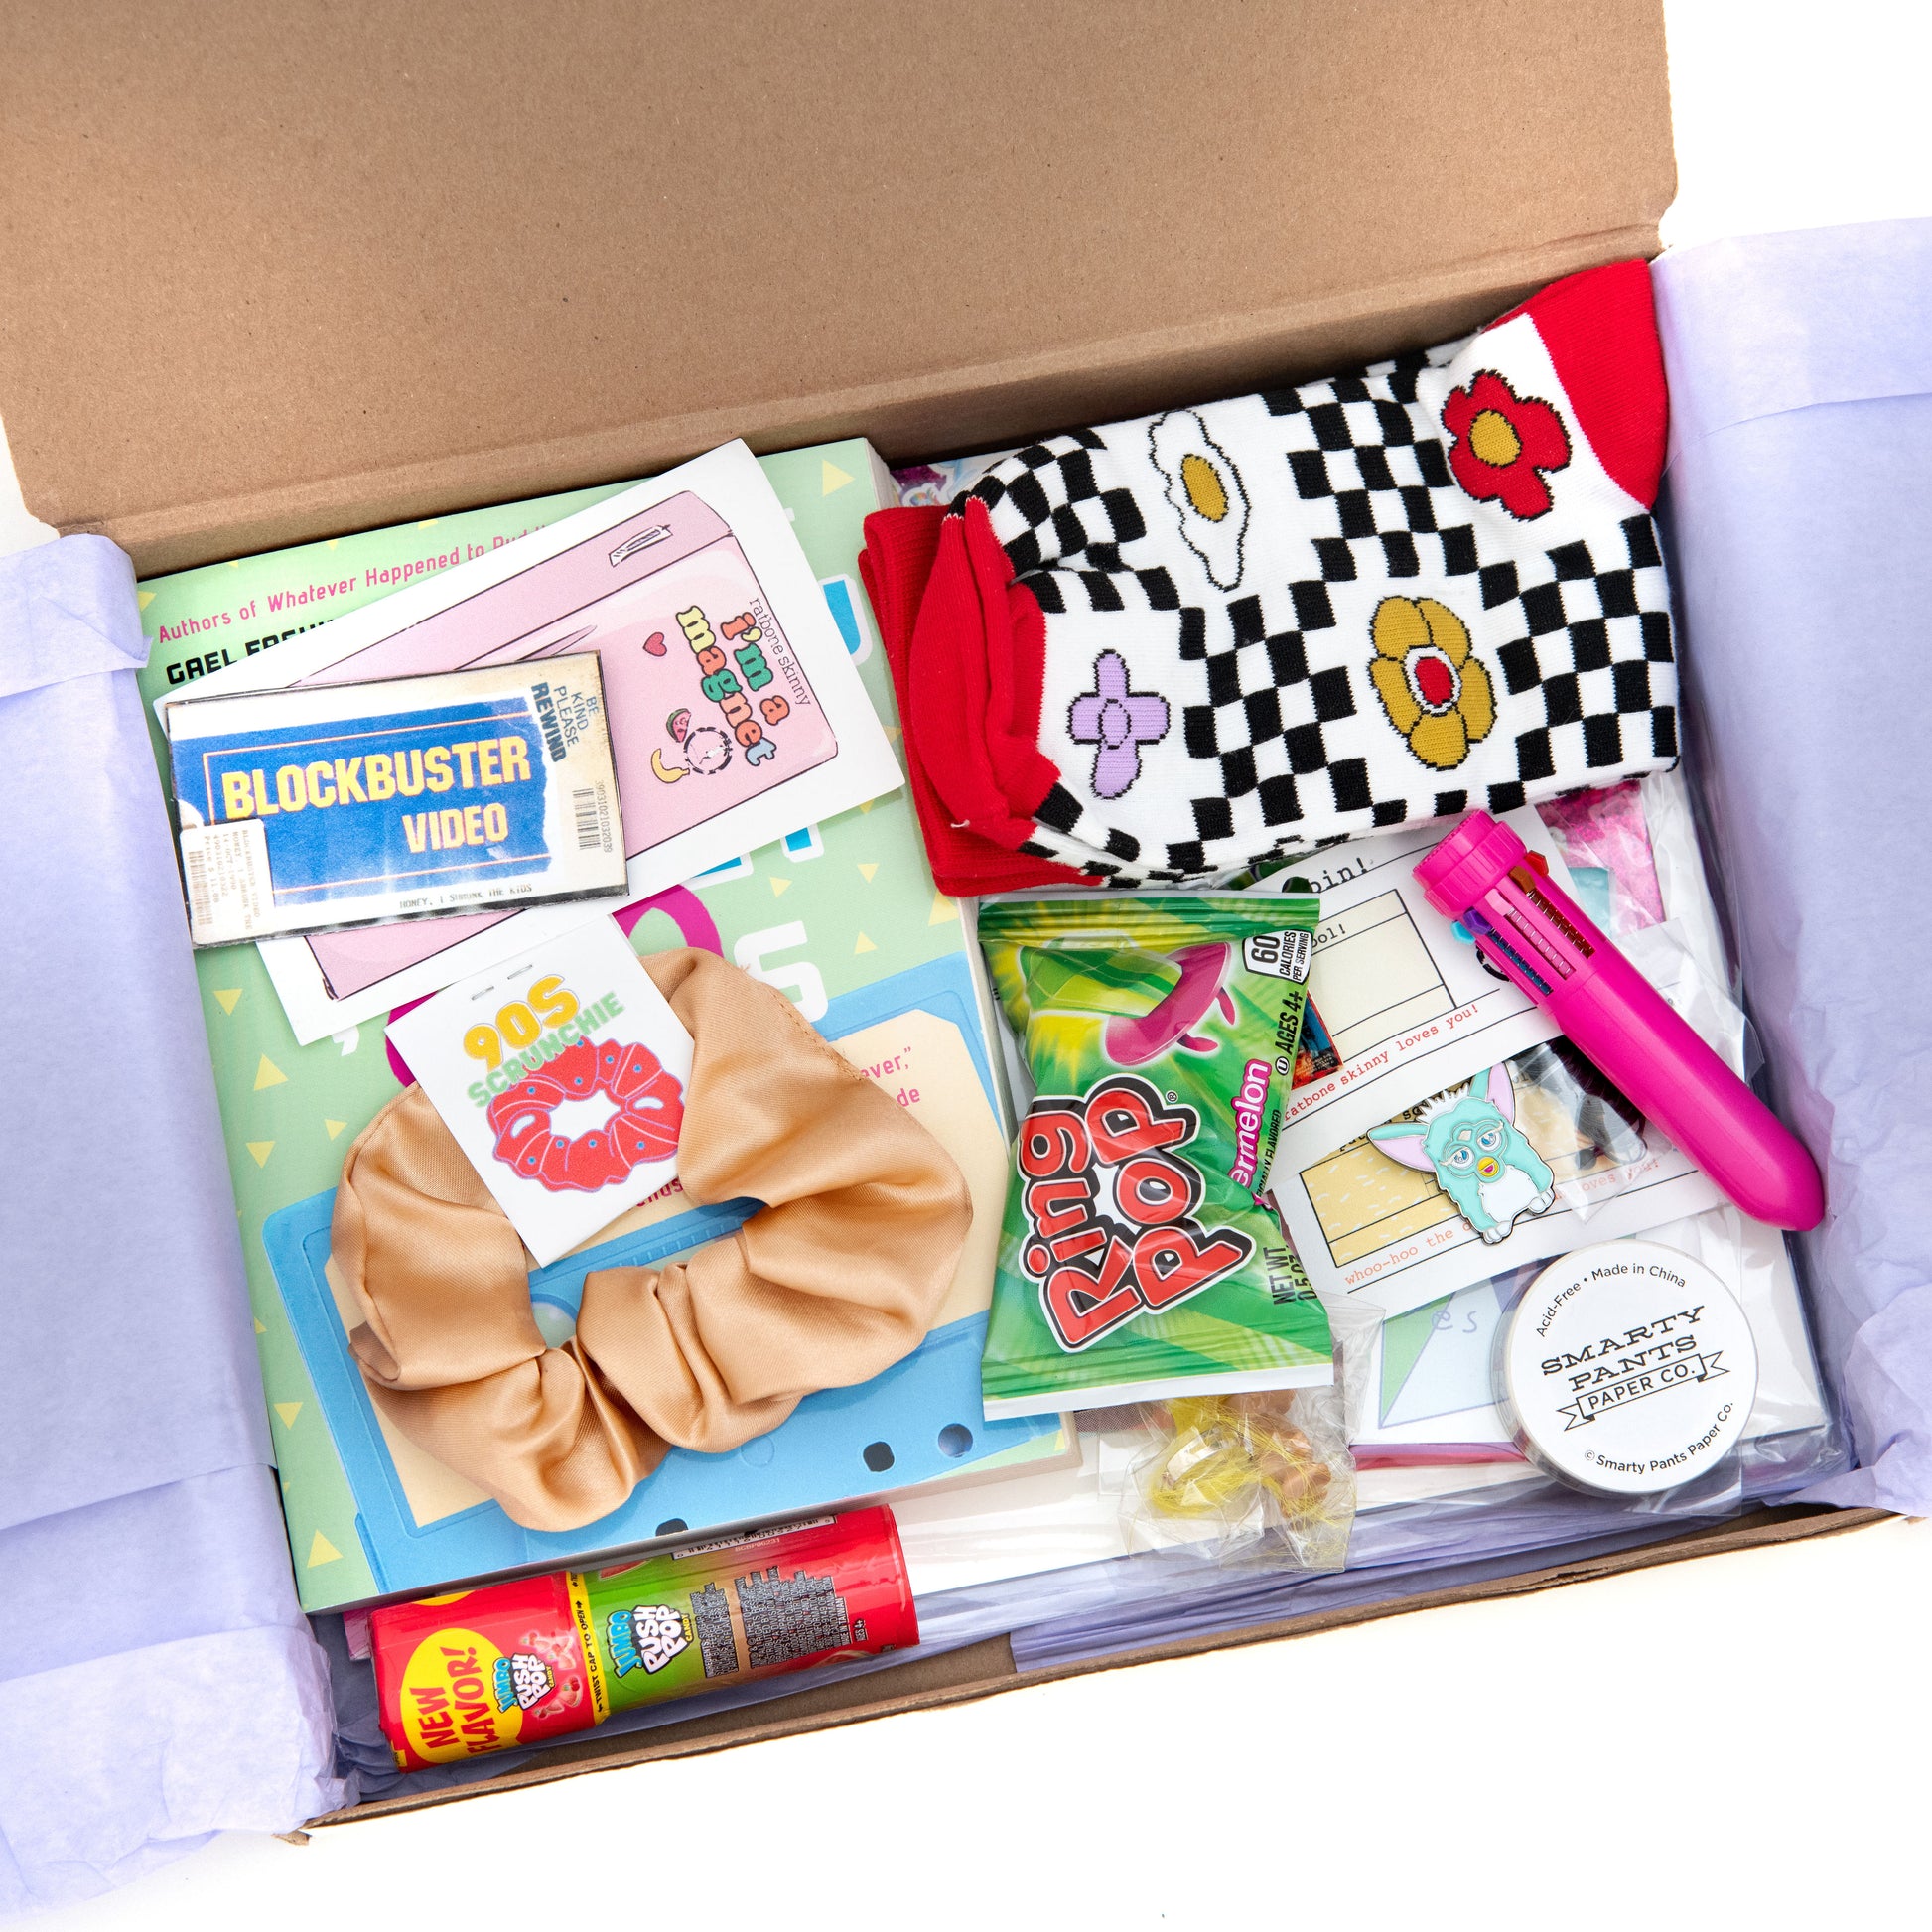 Take a trip down memory lane with our 90s-themed subscription box! This box includes a collection of nostalgia-inducing items like a Furby pin, a stretch yin yang necklace, a Troll ring, a Nightmare on Elm Street pin, ring pop candy, washi tape, fun socks, blockbuster magnnet,and a trendy scrunchie.